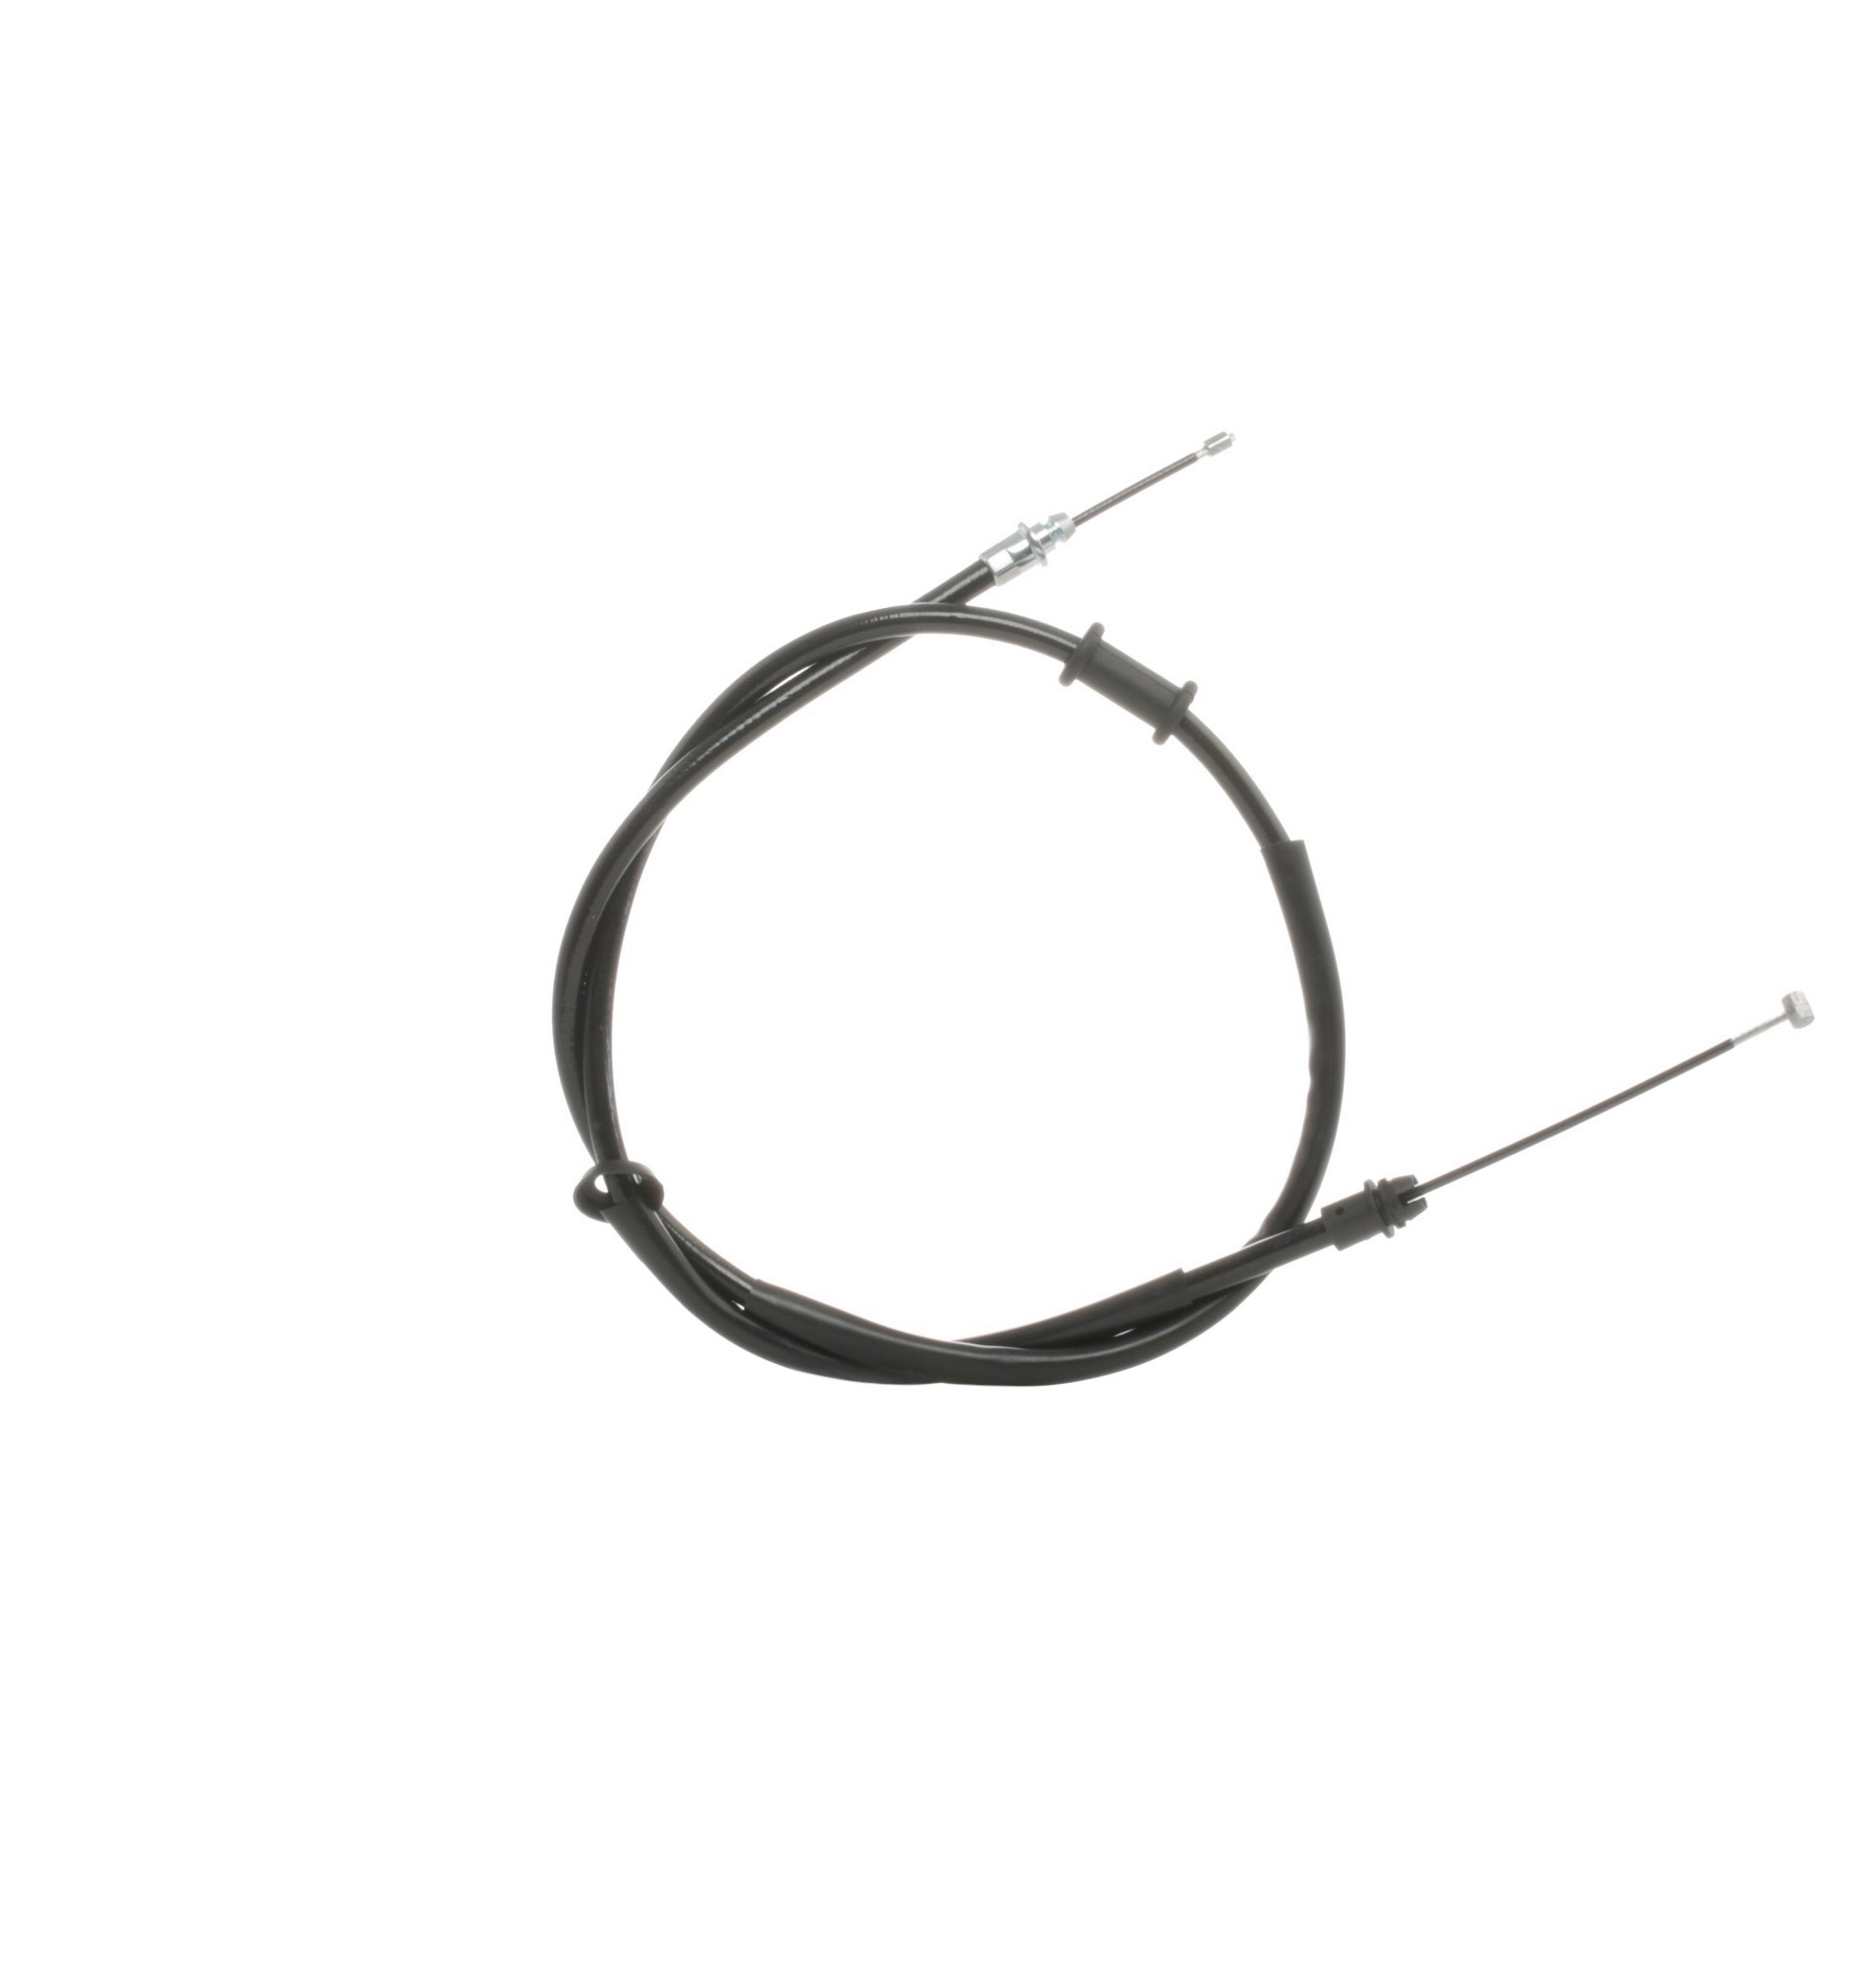 STARK SKCPB-1050044 Hand brake cable Rear, 1456 / 1225mm, Drum Brake, without accessories